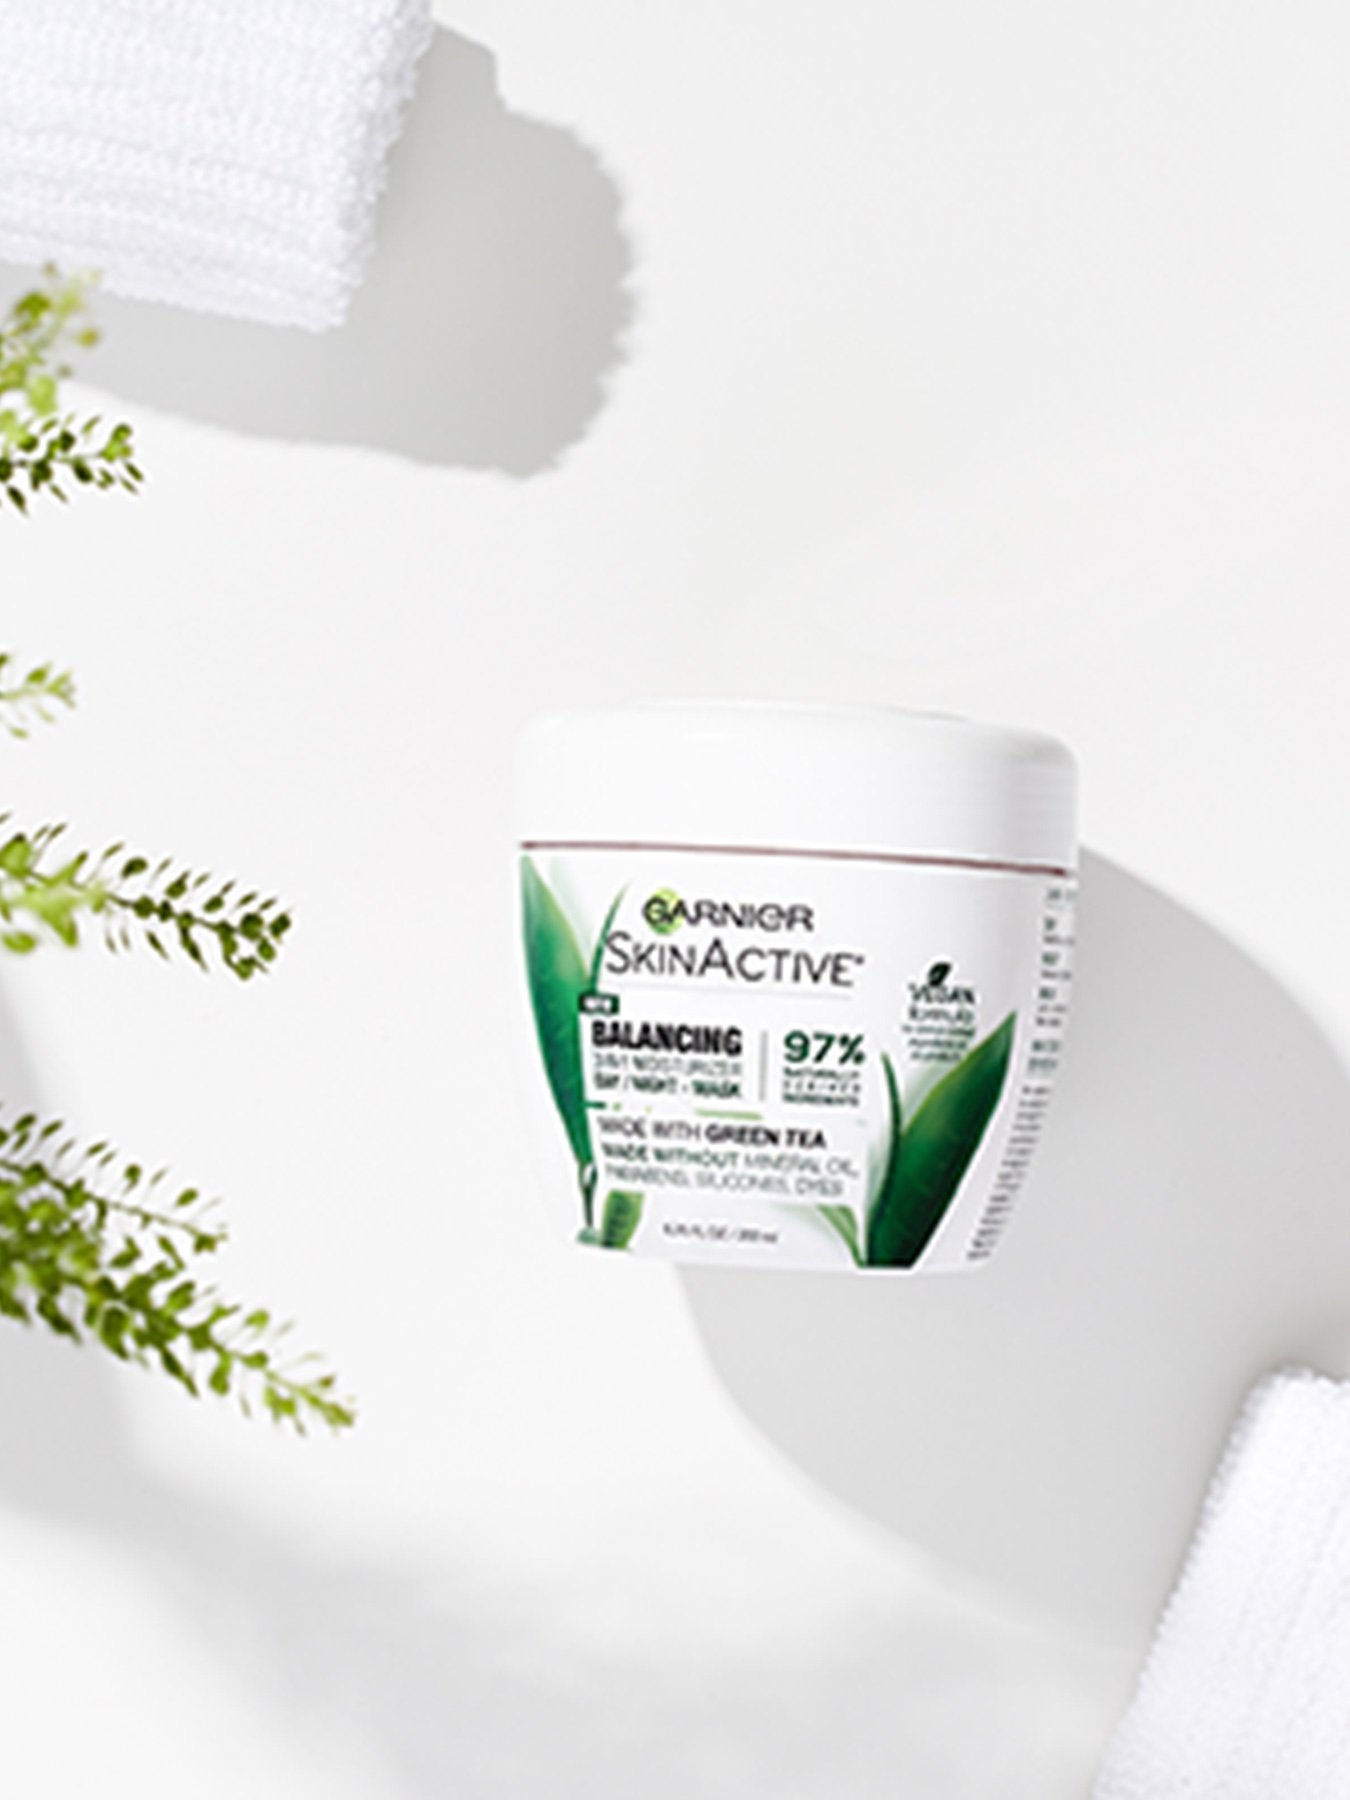 Garnier SkinActive Balancing 3-in-1 Face Moisturizer with Green Tea on a white surface with two white loofahs and some greenery. 